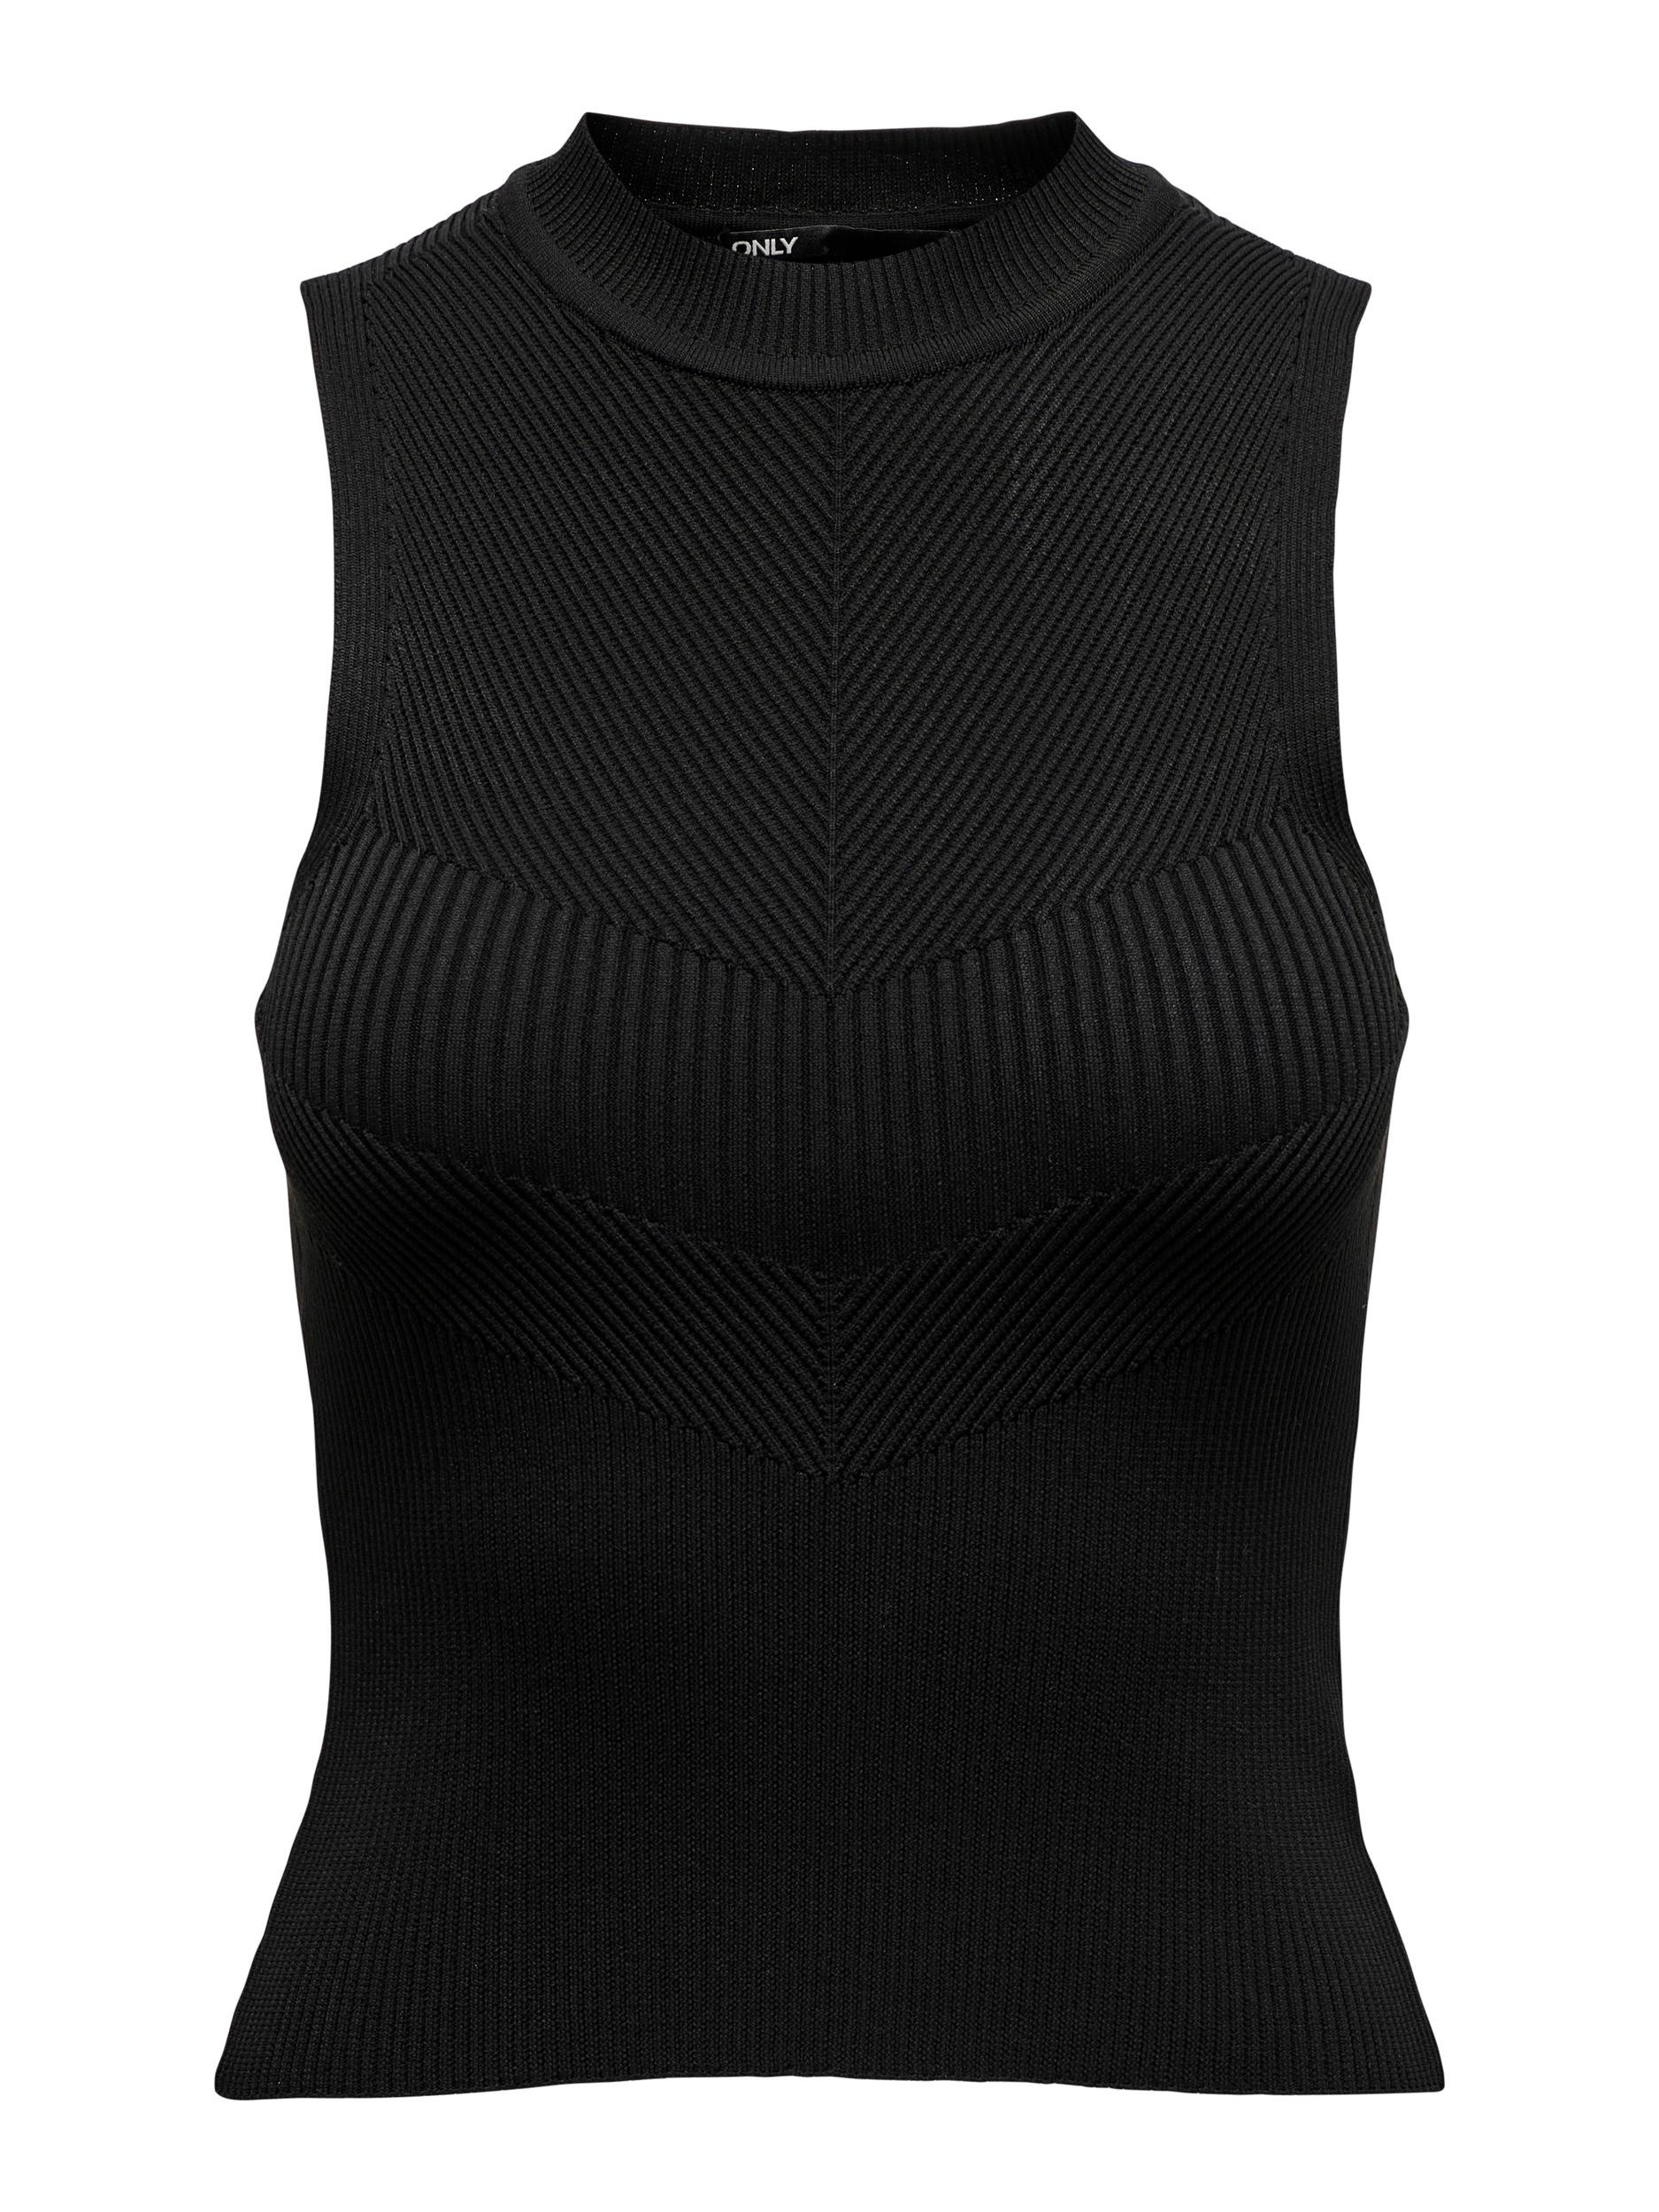 Only - Knitted top, Black, large image number 0